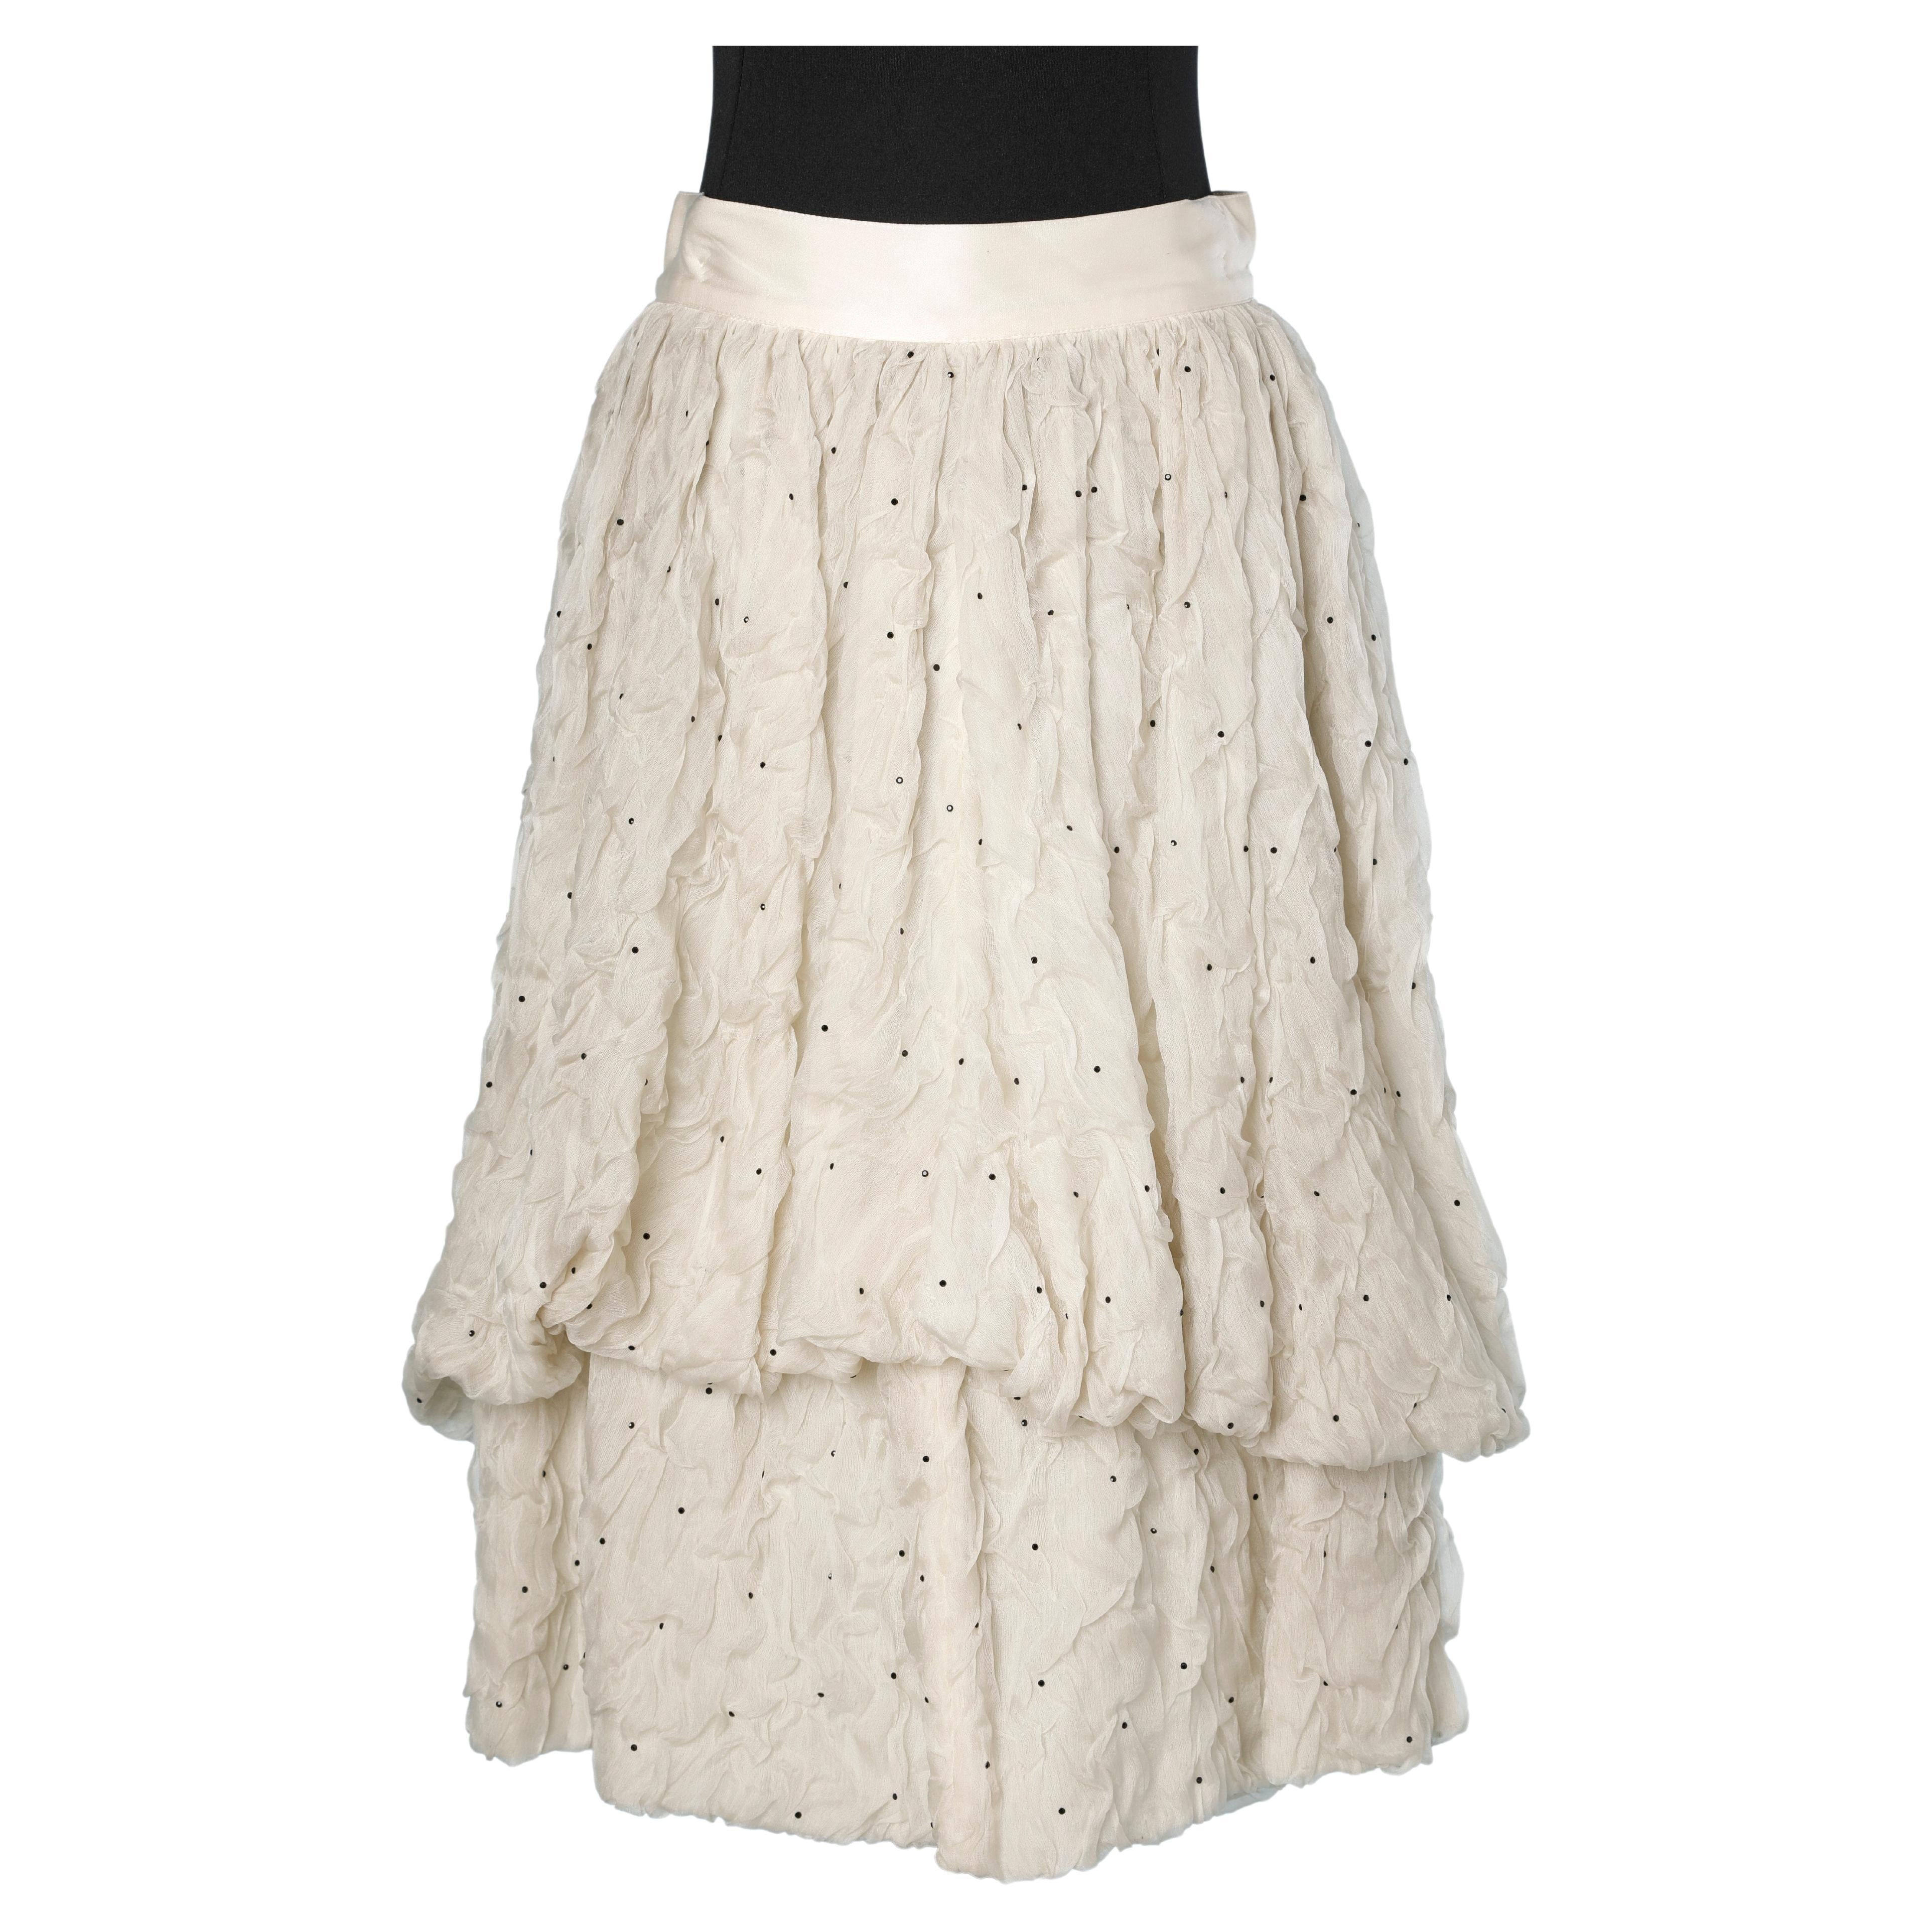 Puff skirt in stiff and wrinkled tulle with tiny black beads Gianni Versace  For Sale